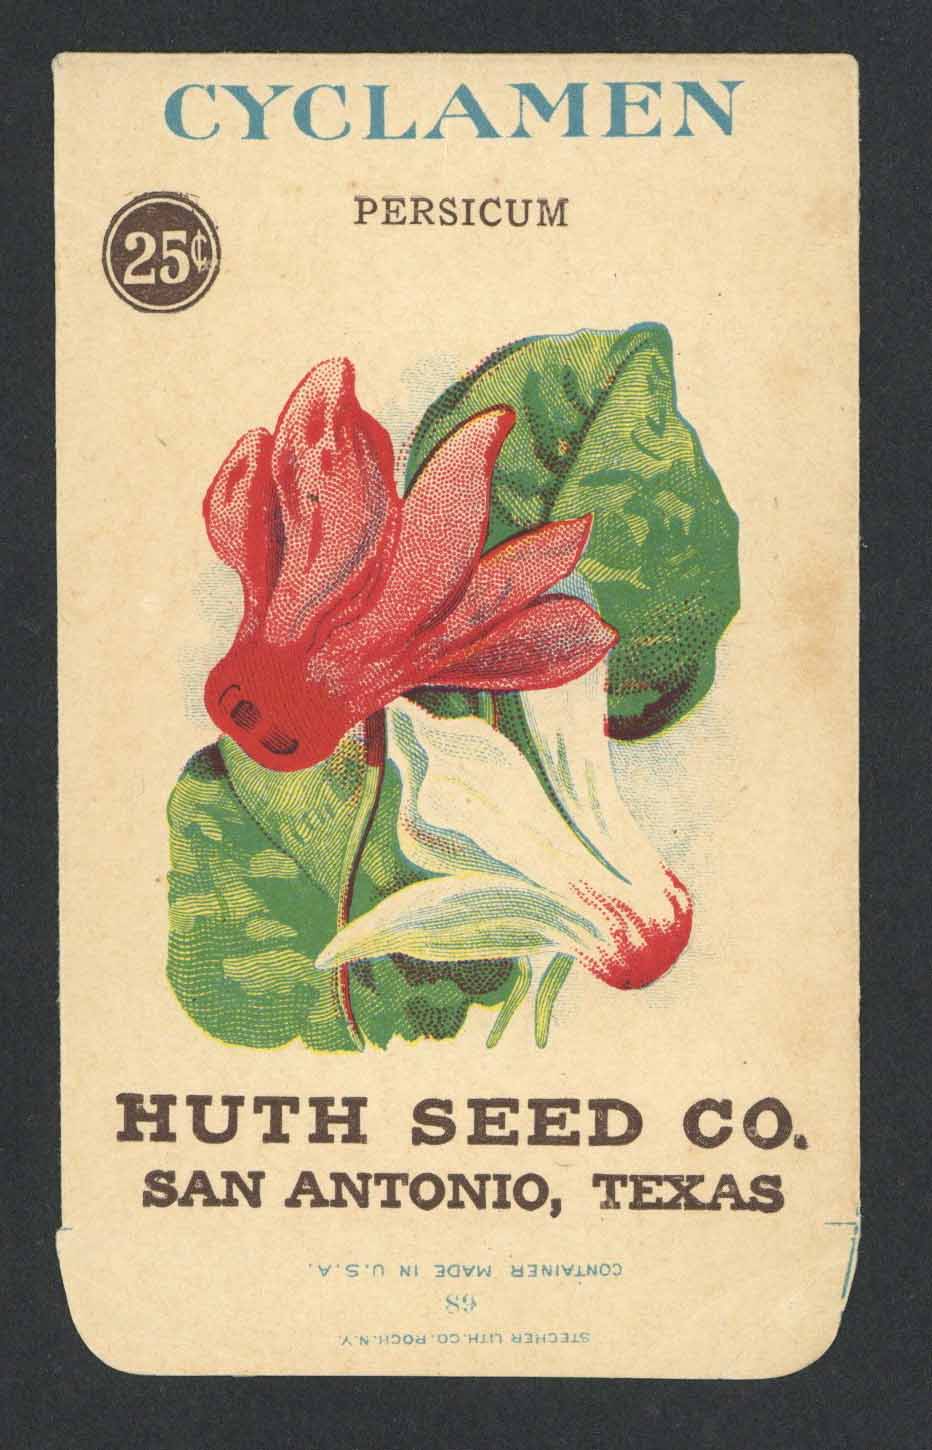 Cyclamen Antique Huth Seed Co. Packet